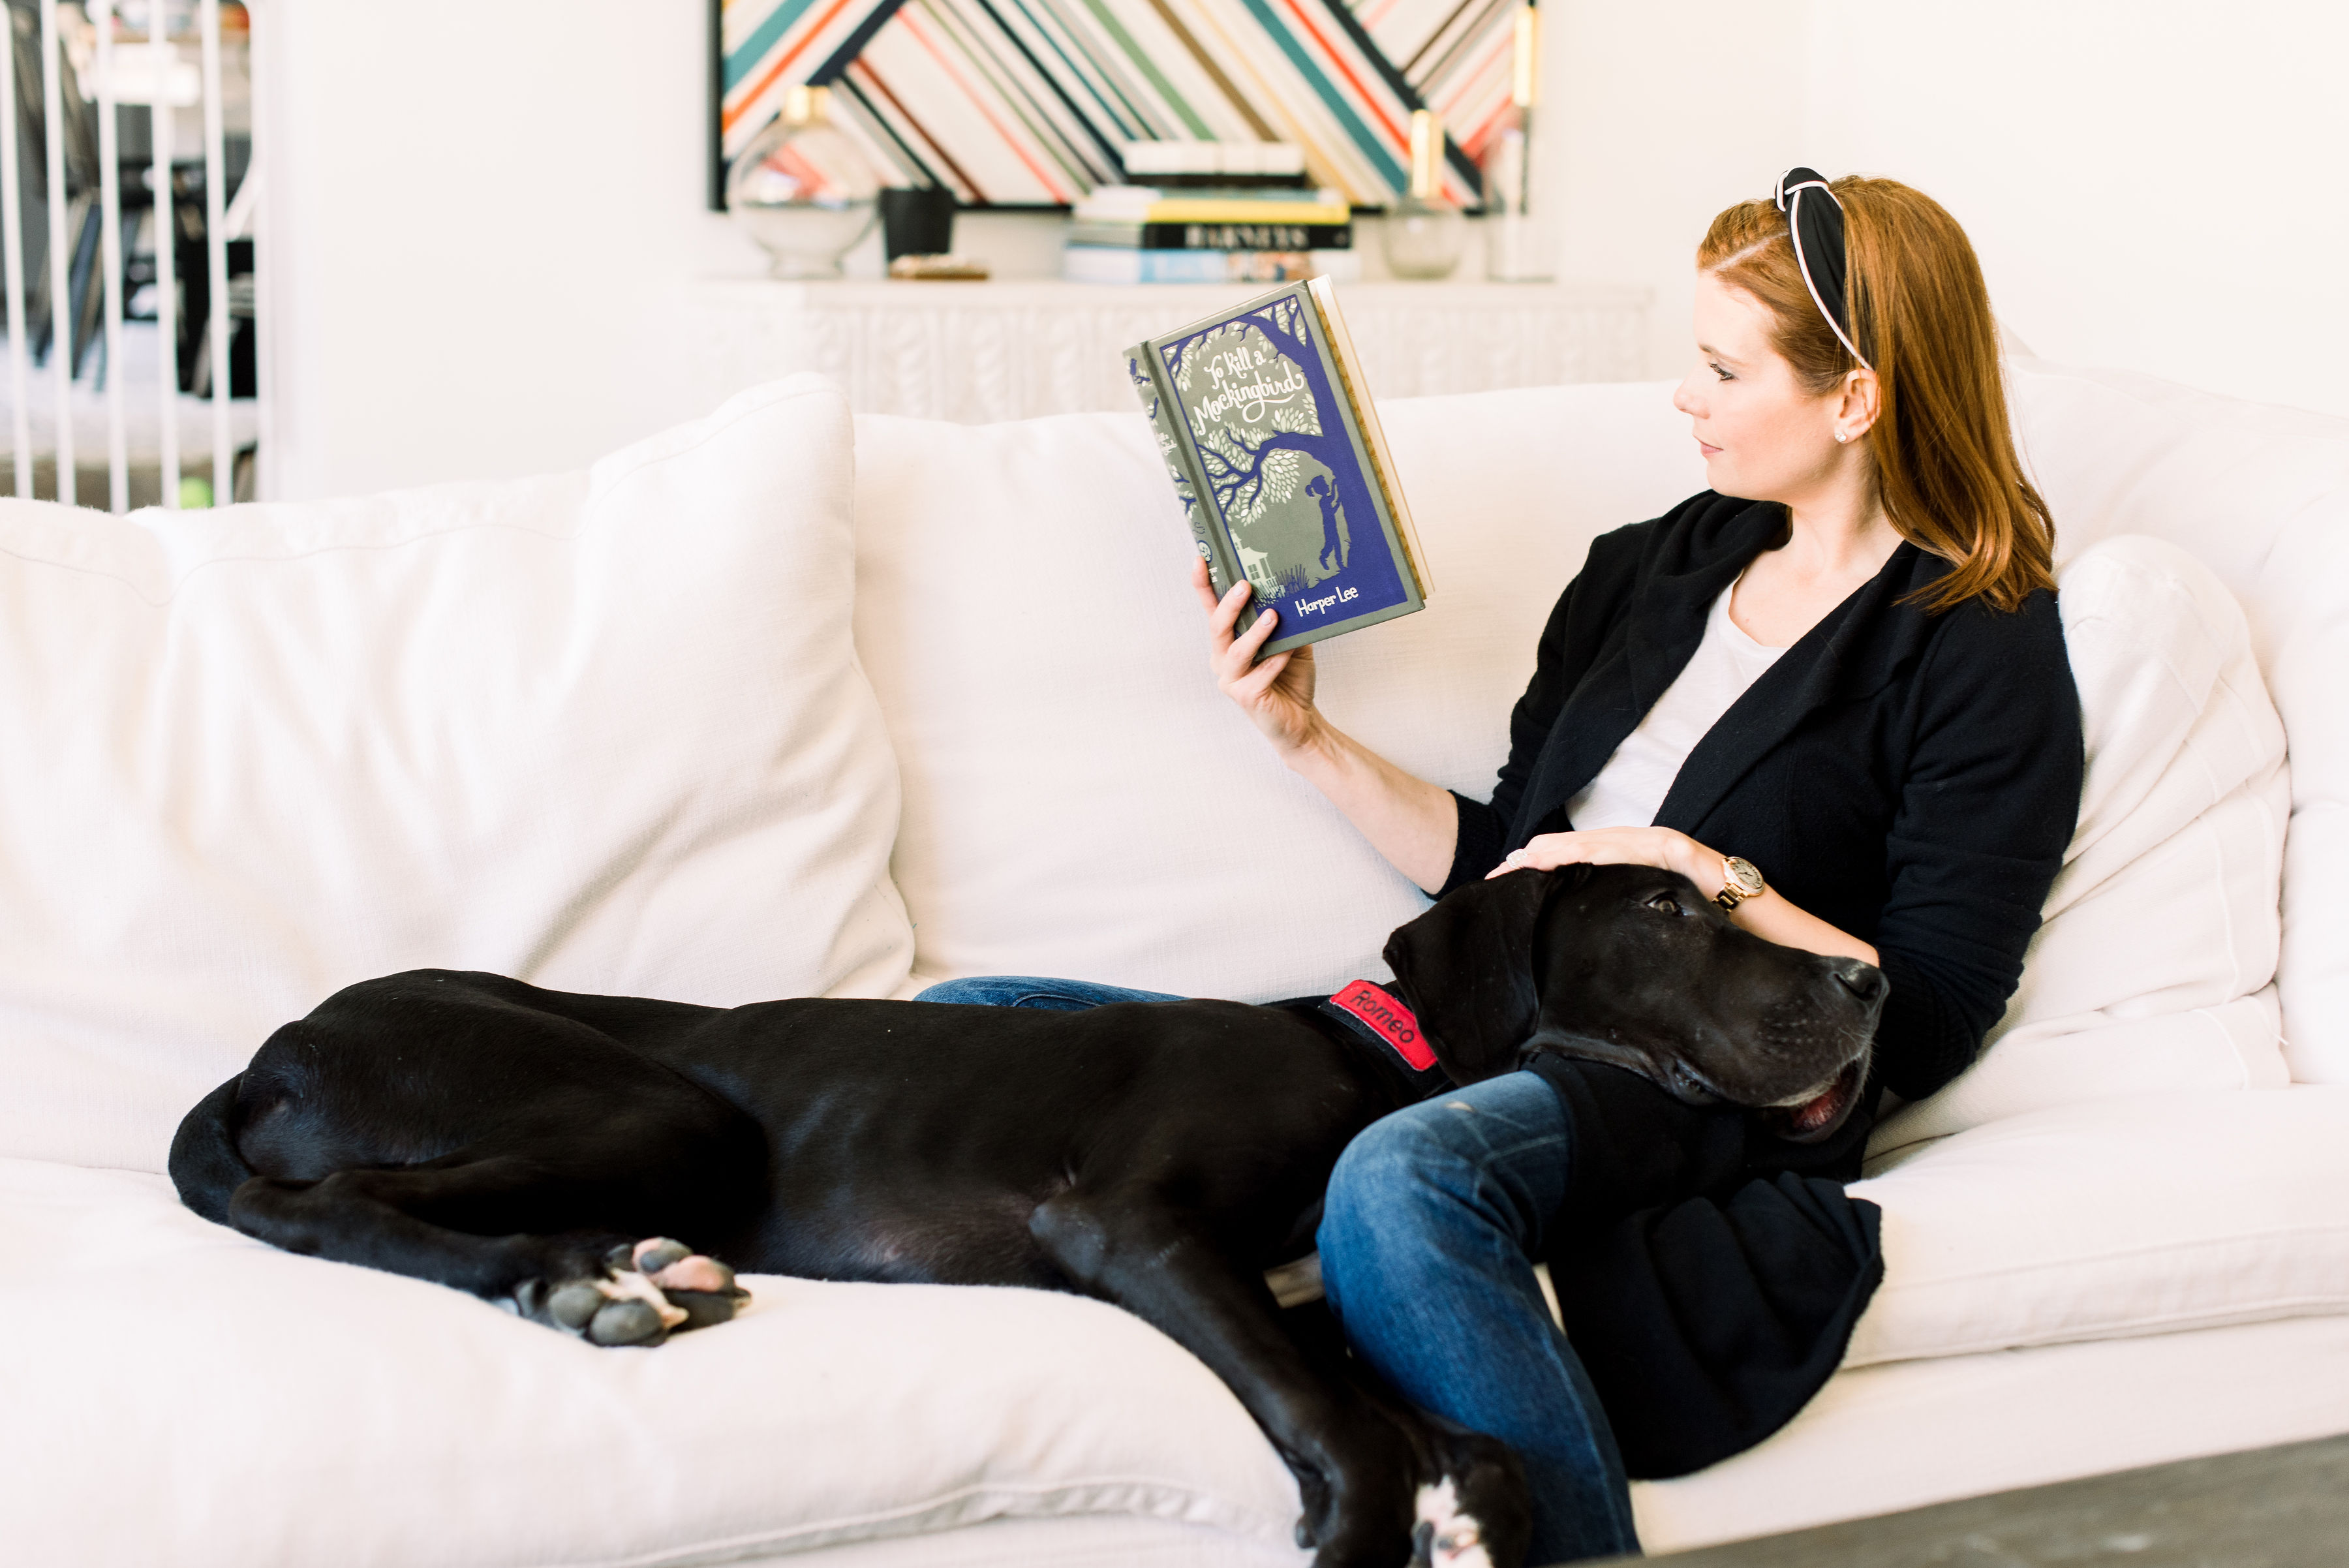 JoAnna Garcia Swisher reads a book with Romeo on her lap